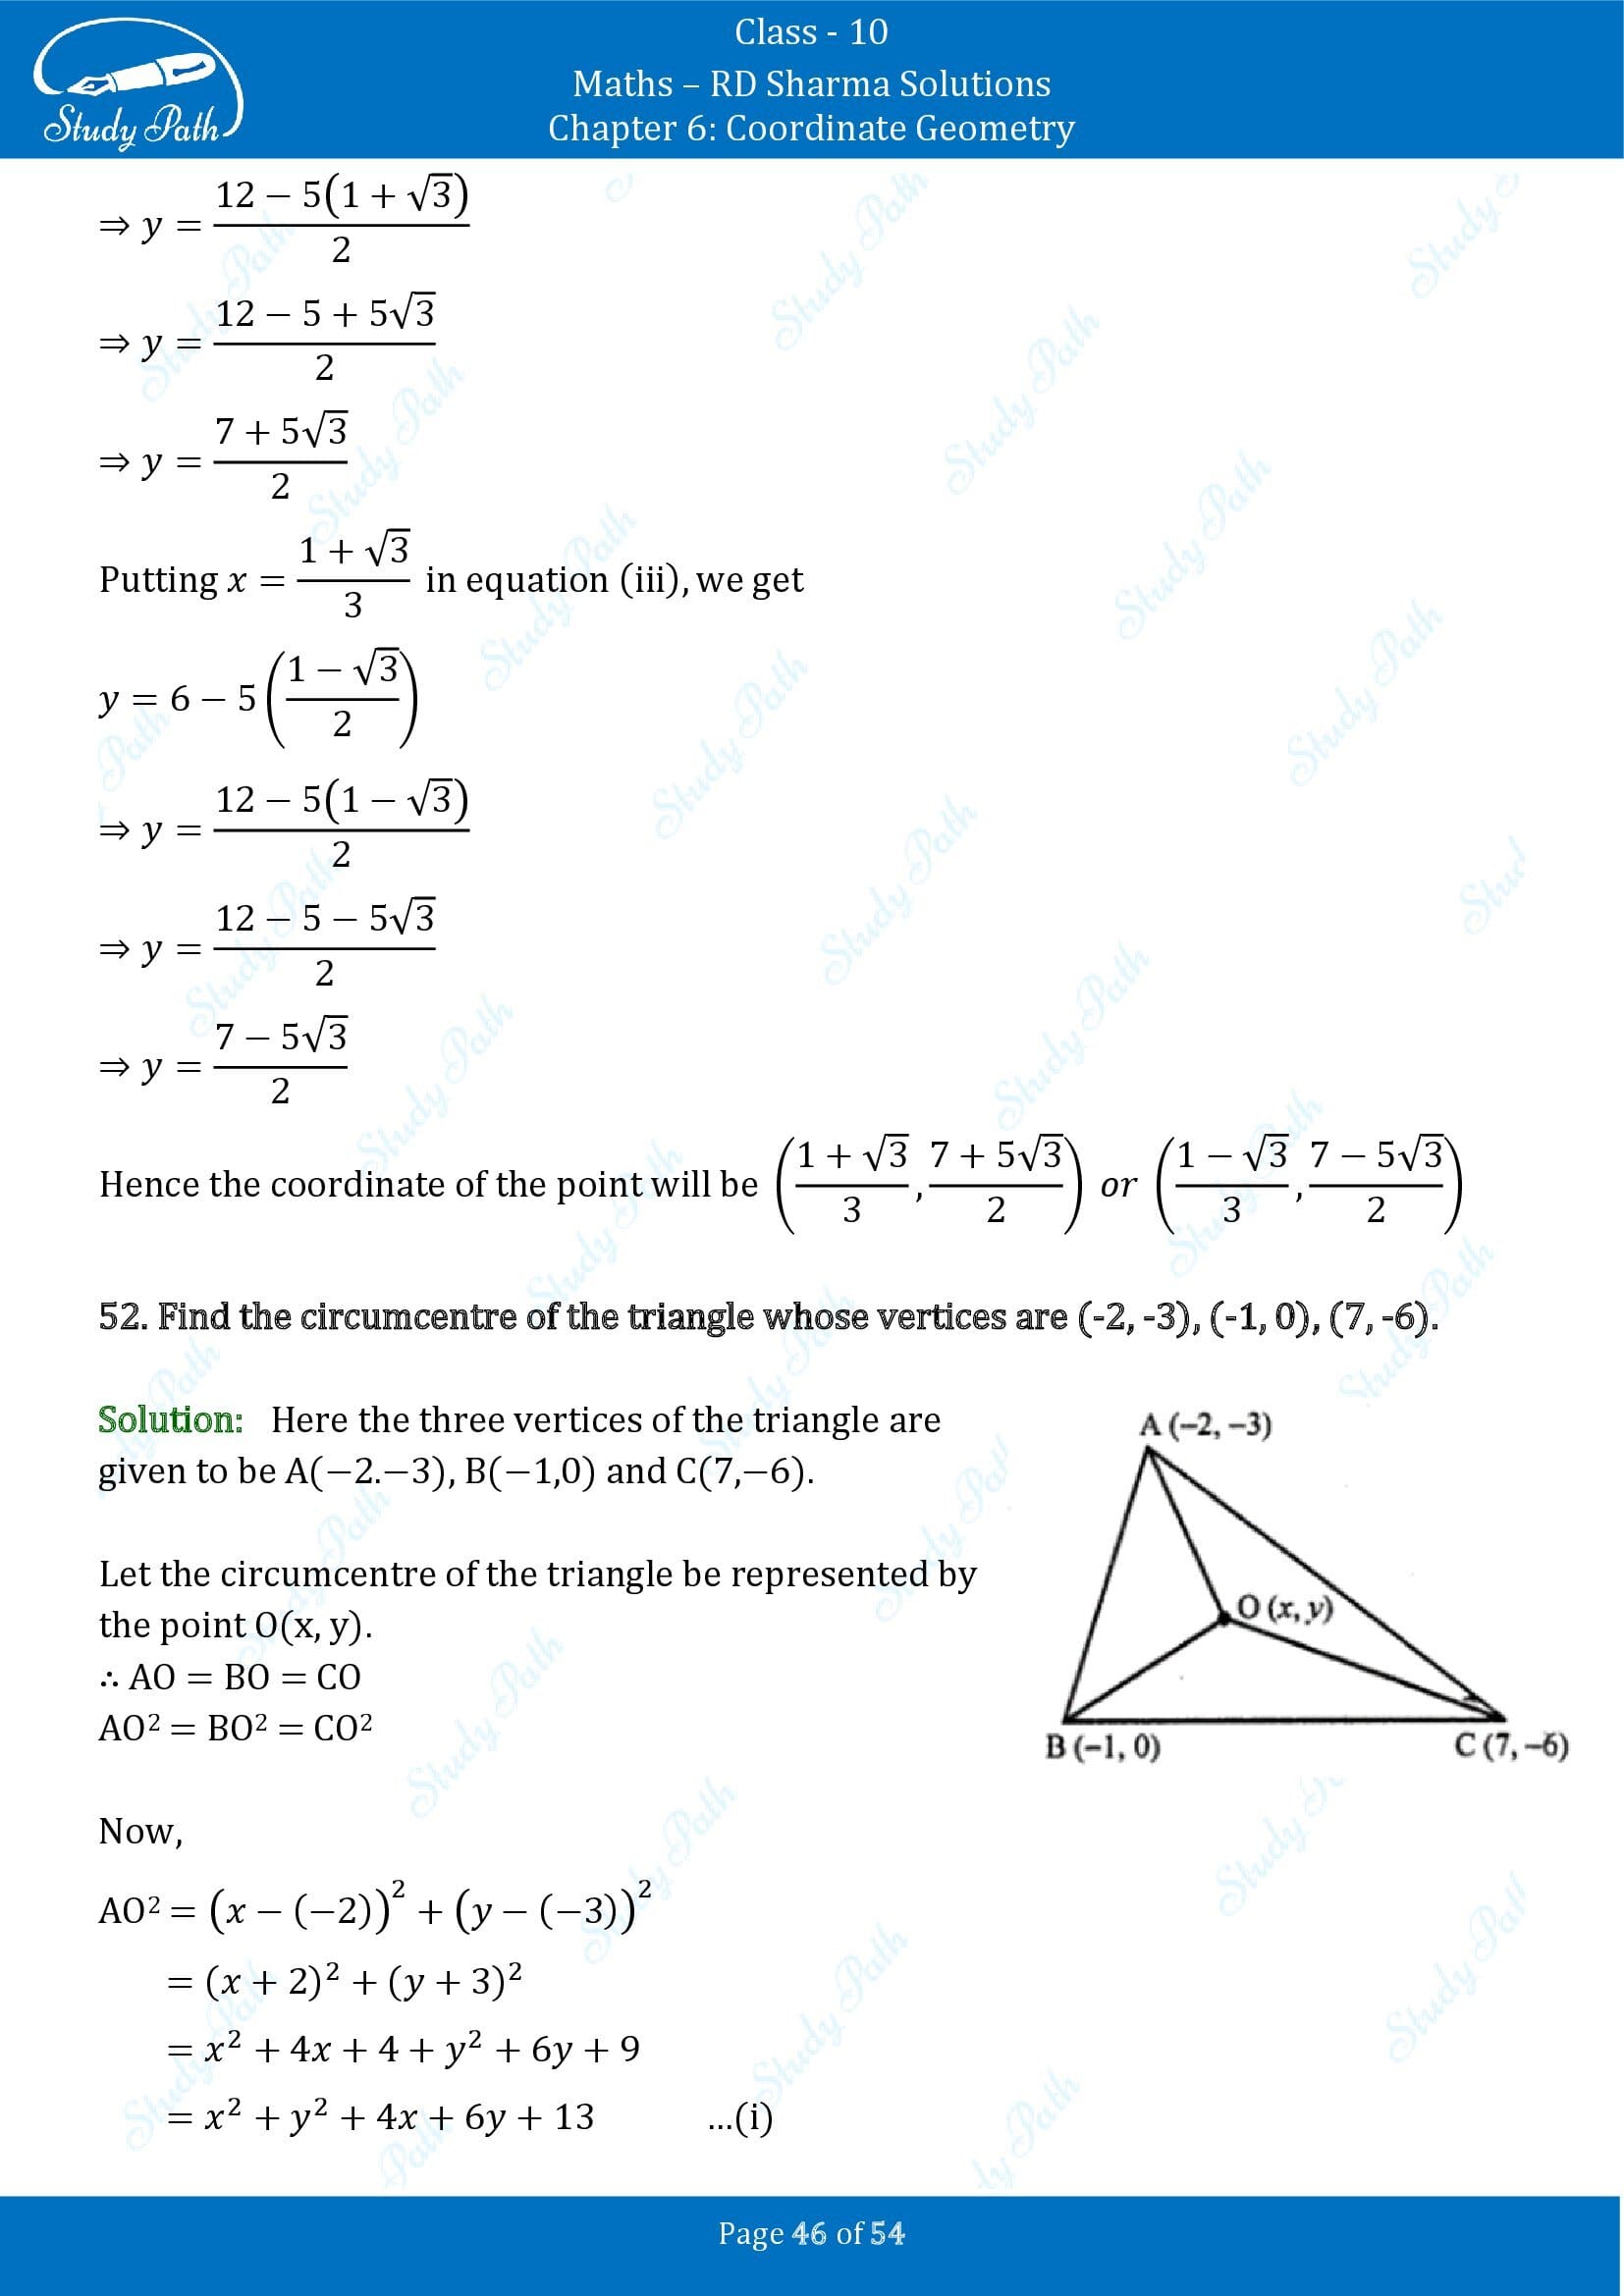 RD Sharma Solutions Class 10 Chapter 6 Coordinate Geometry Exercise 6.2 0046